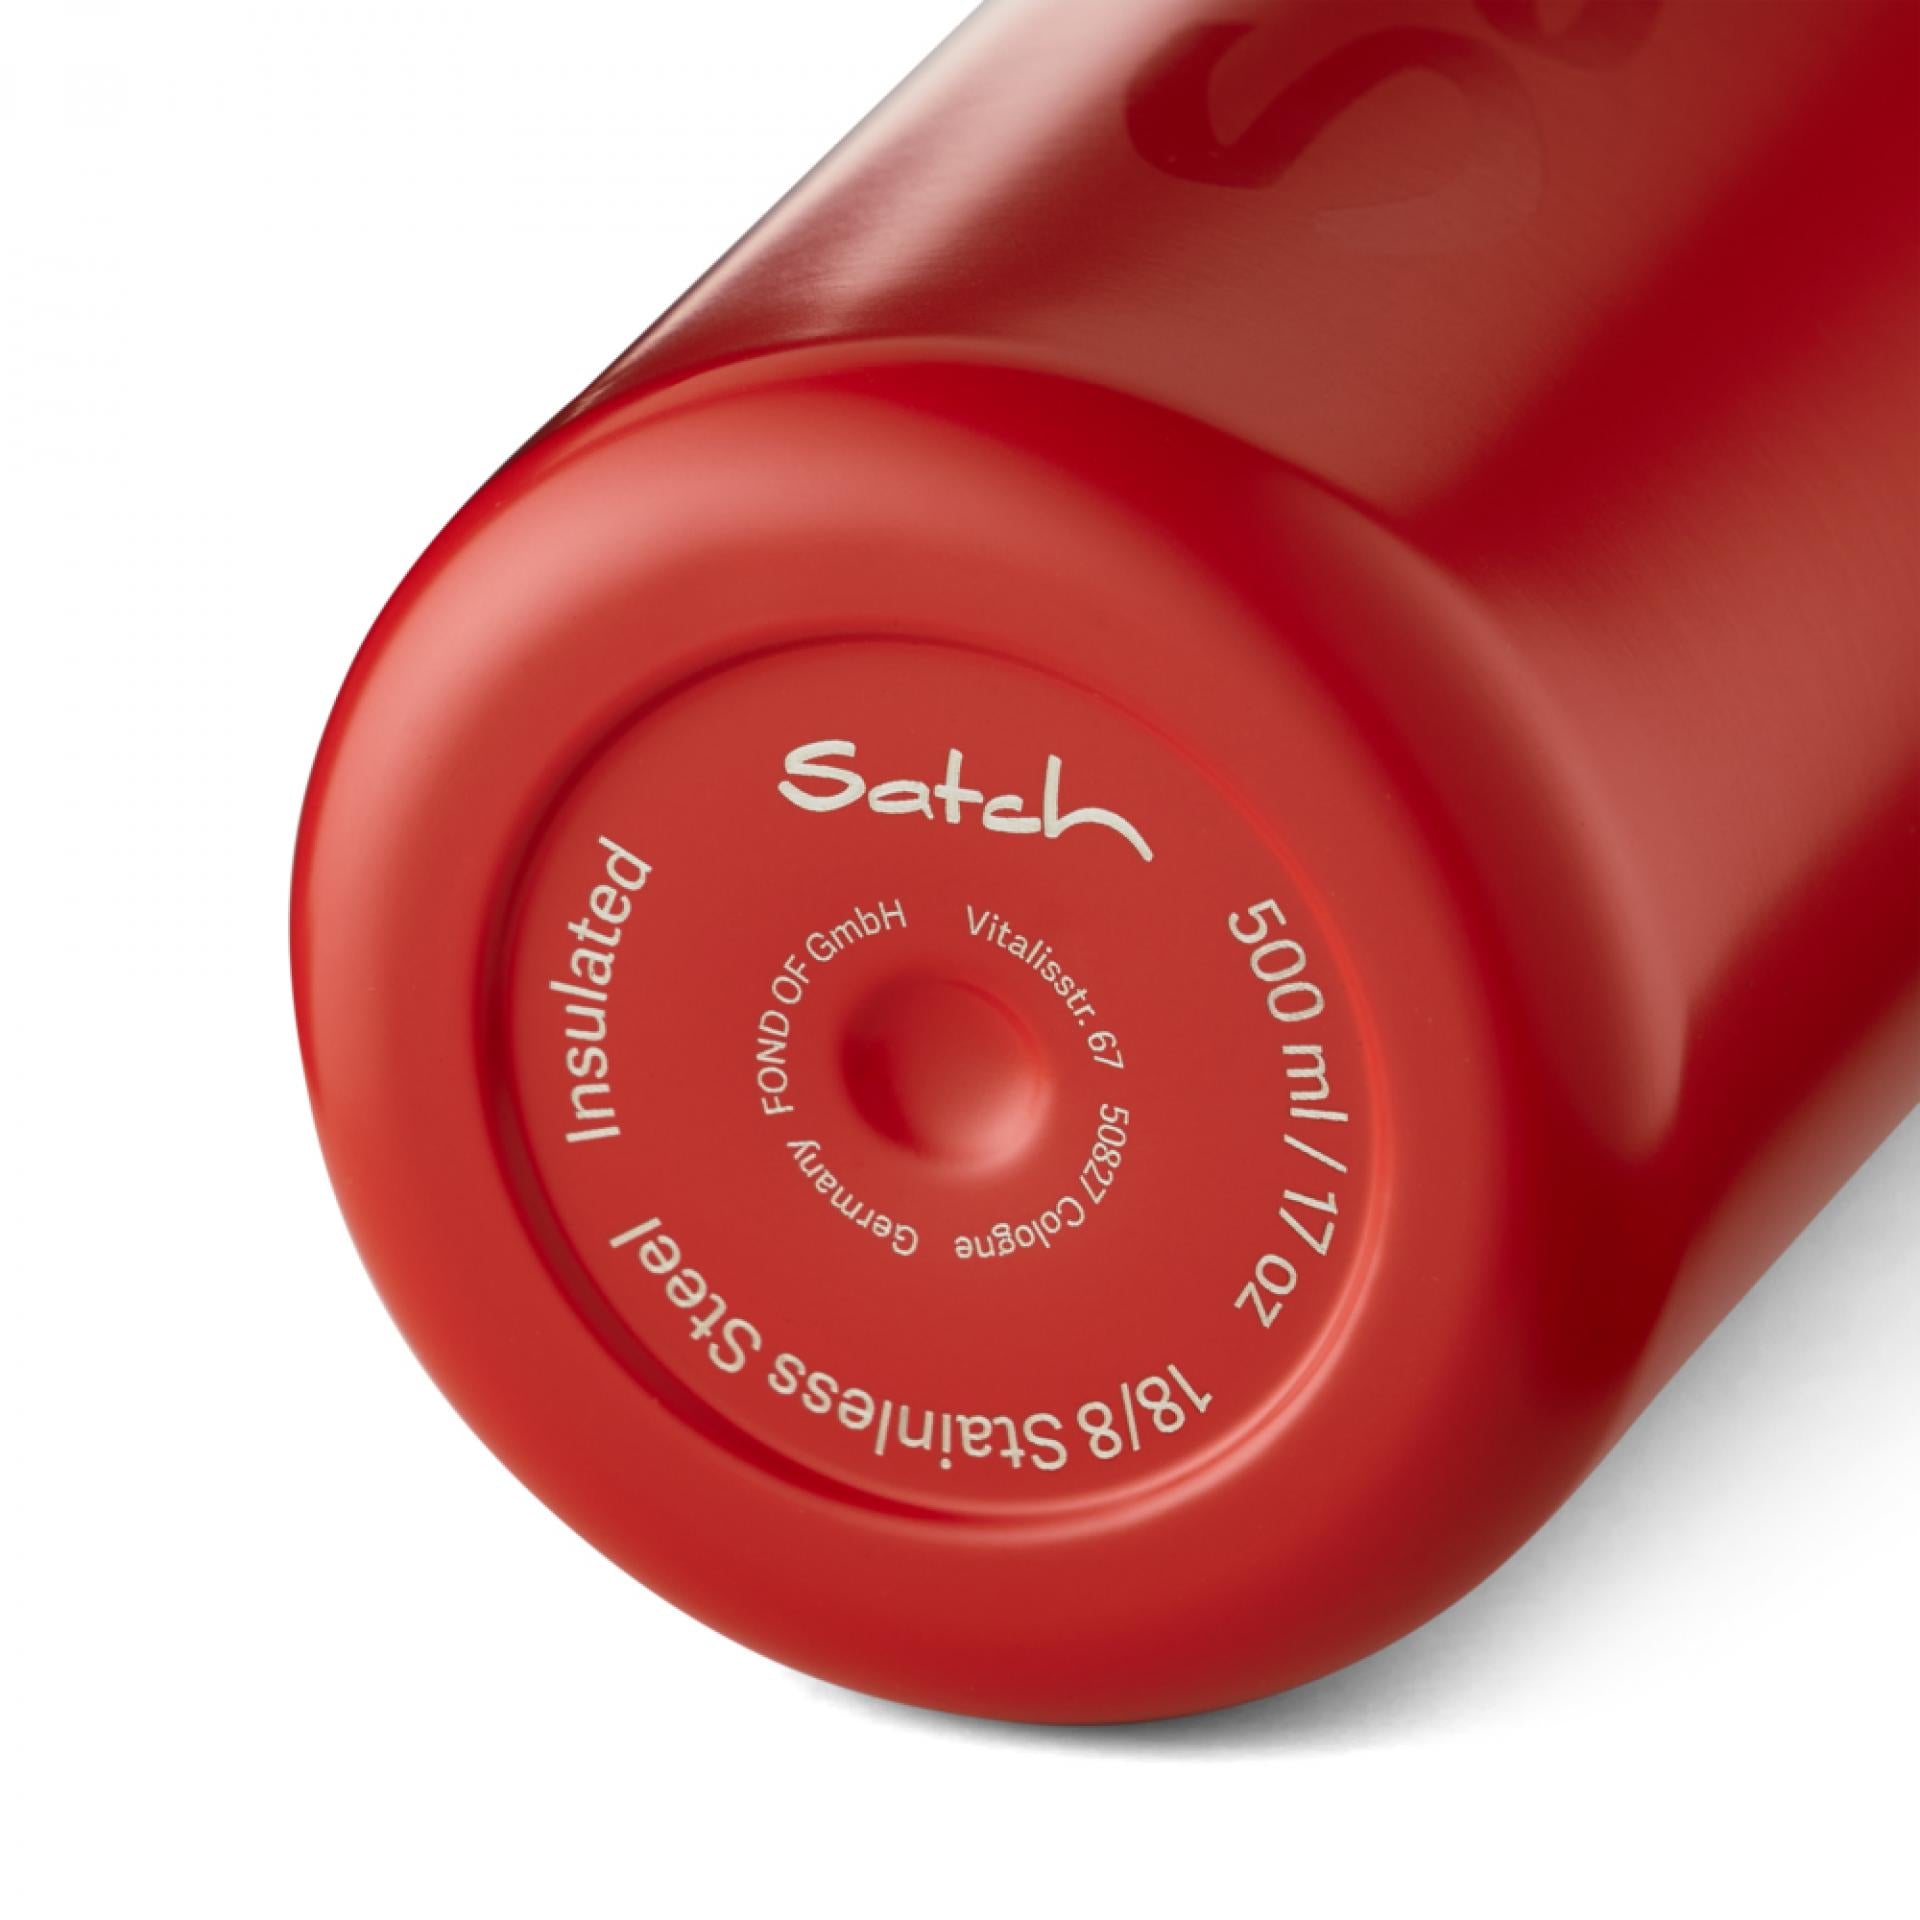 Satch Trinkflasche Edelstahl - Farbe: Rot